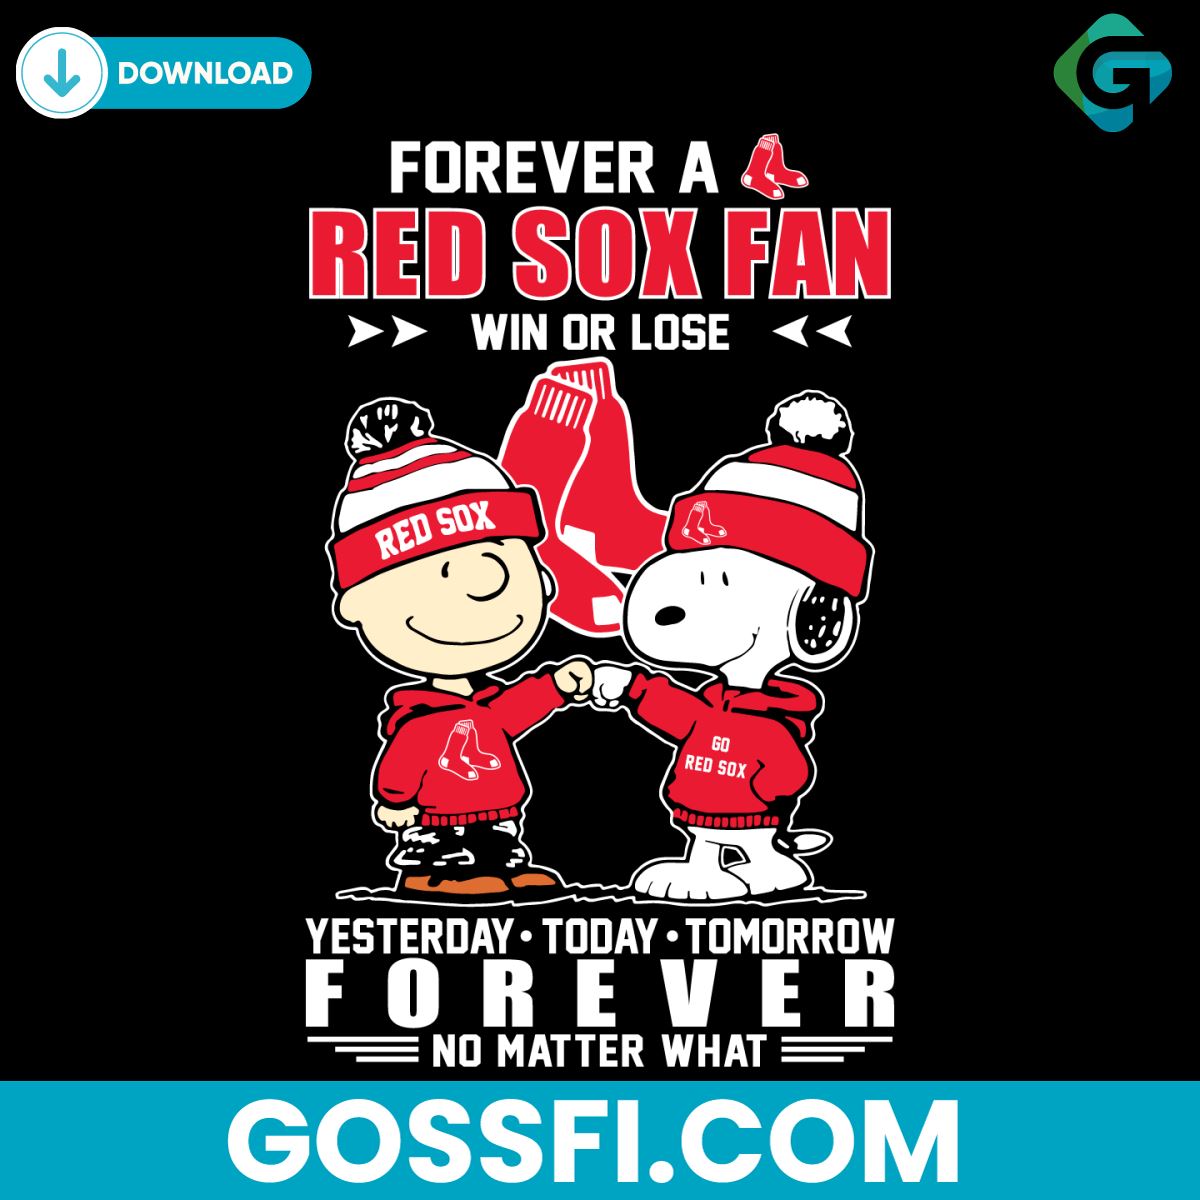 charlie-brown-and-snoopy-forever-a-red-sox-fan-win-or-lose-svg